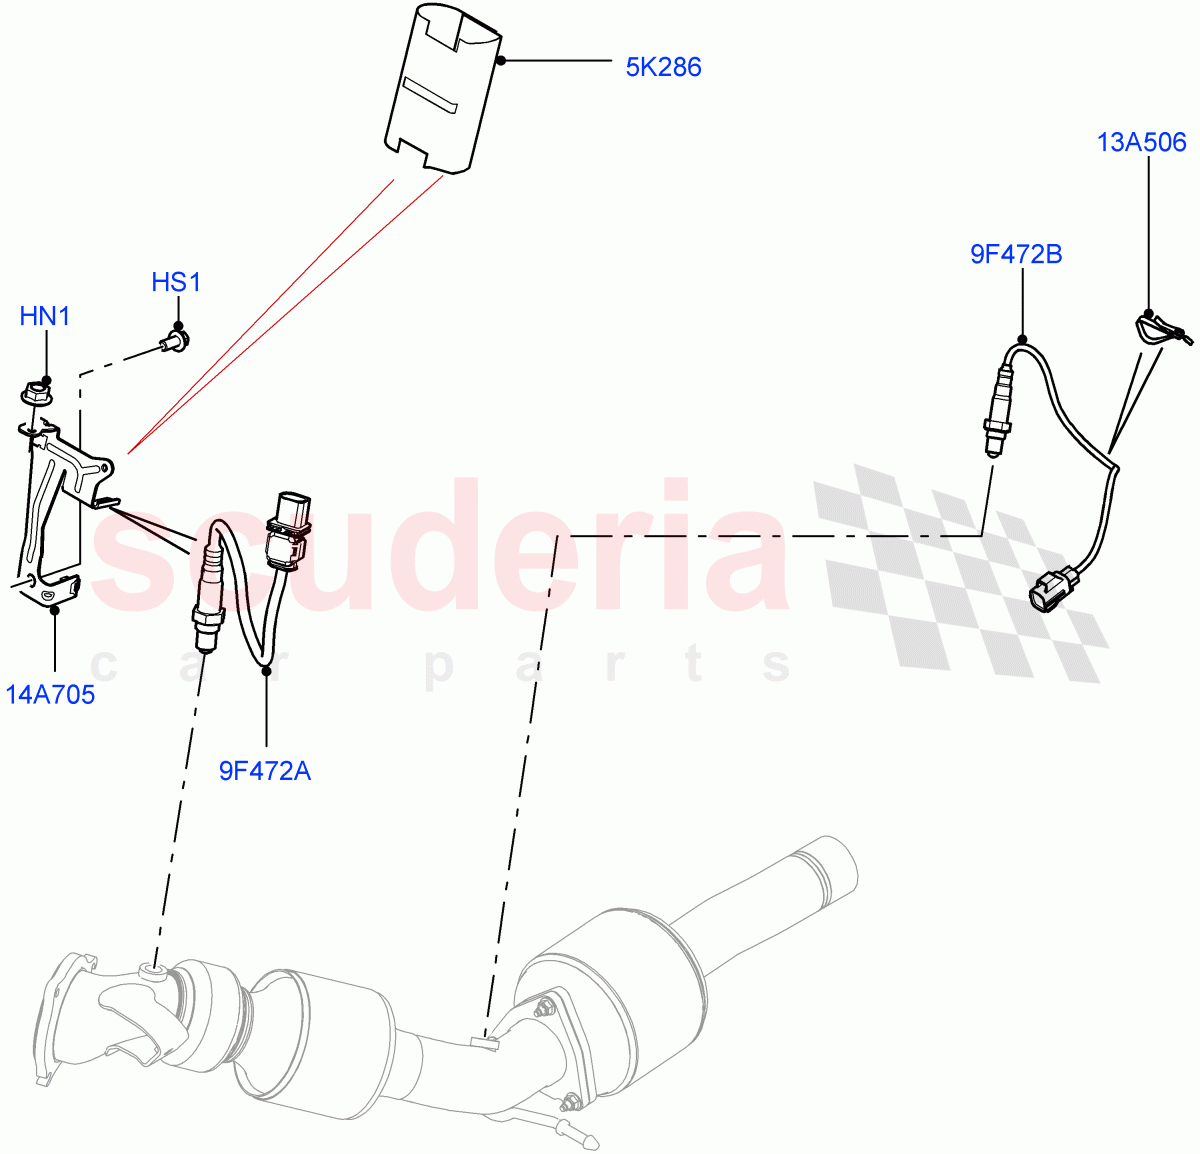 Exhaust Sensors And Modules(Exhaust System Sensors)(2.0L 16V TIVCT T/C 240PS Petrol,Itatiaia (Brazil))((V)FROMGT000001) of Land Rover Land Rover Discovery Sport (2015+) [2.0 Turbo Petrol GTDI]